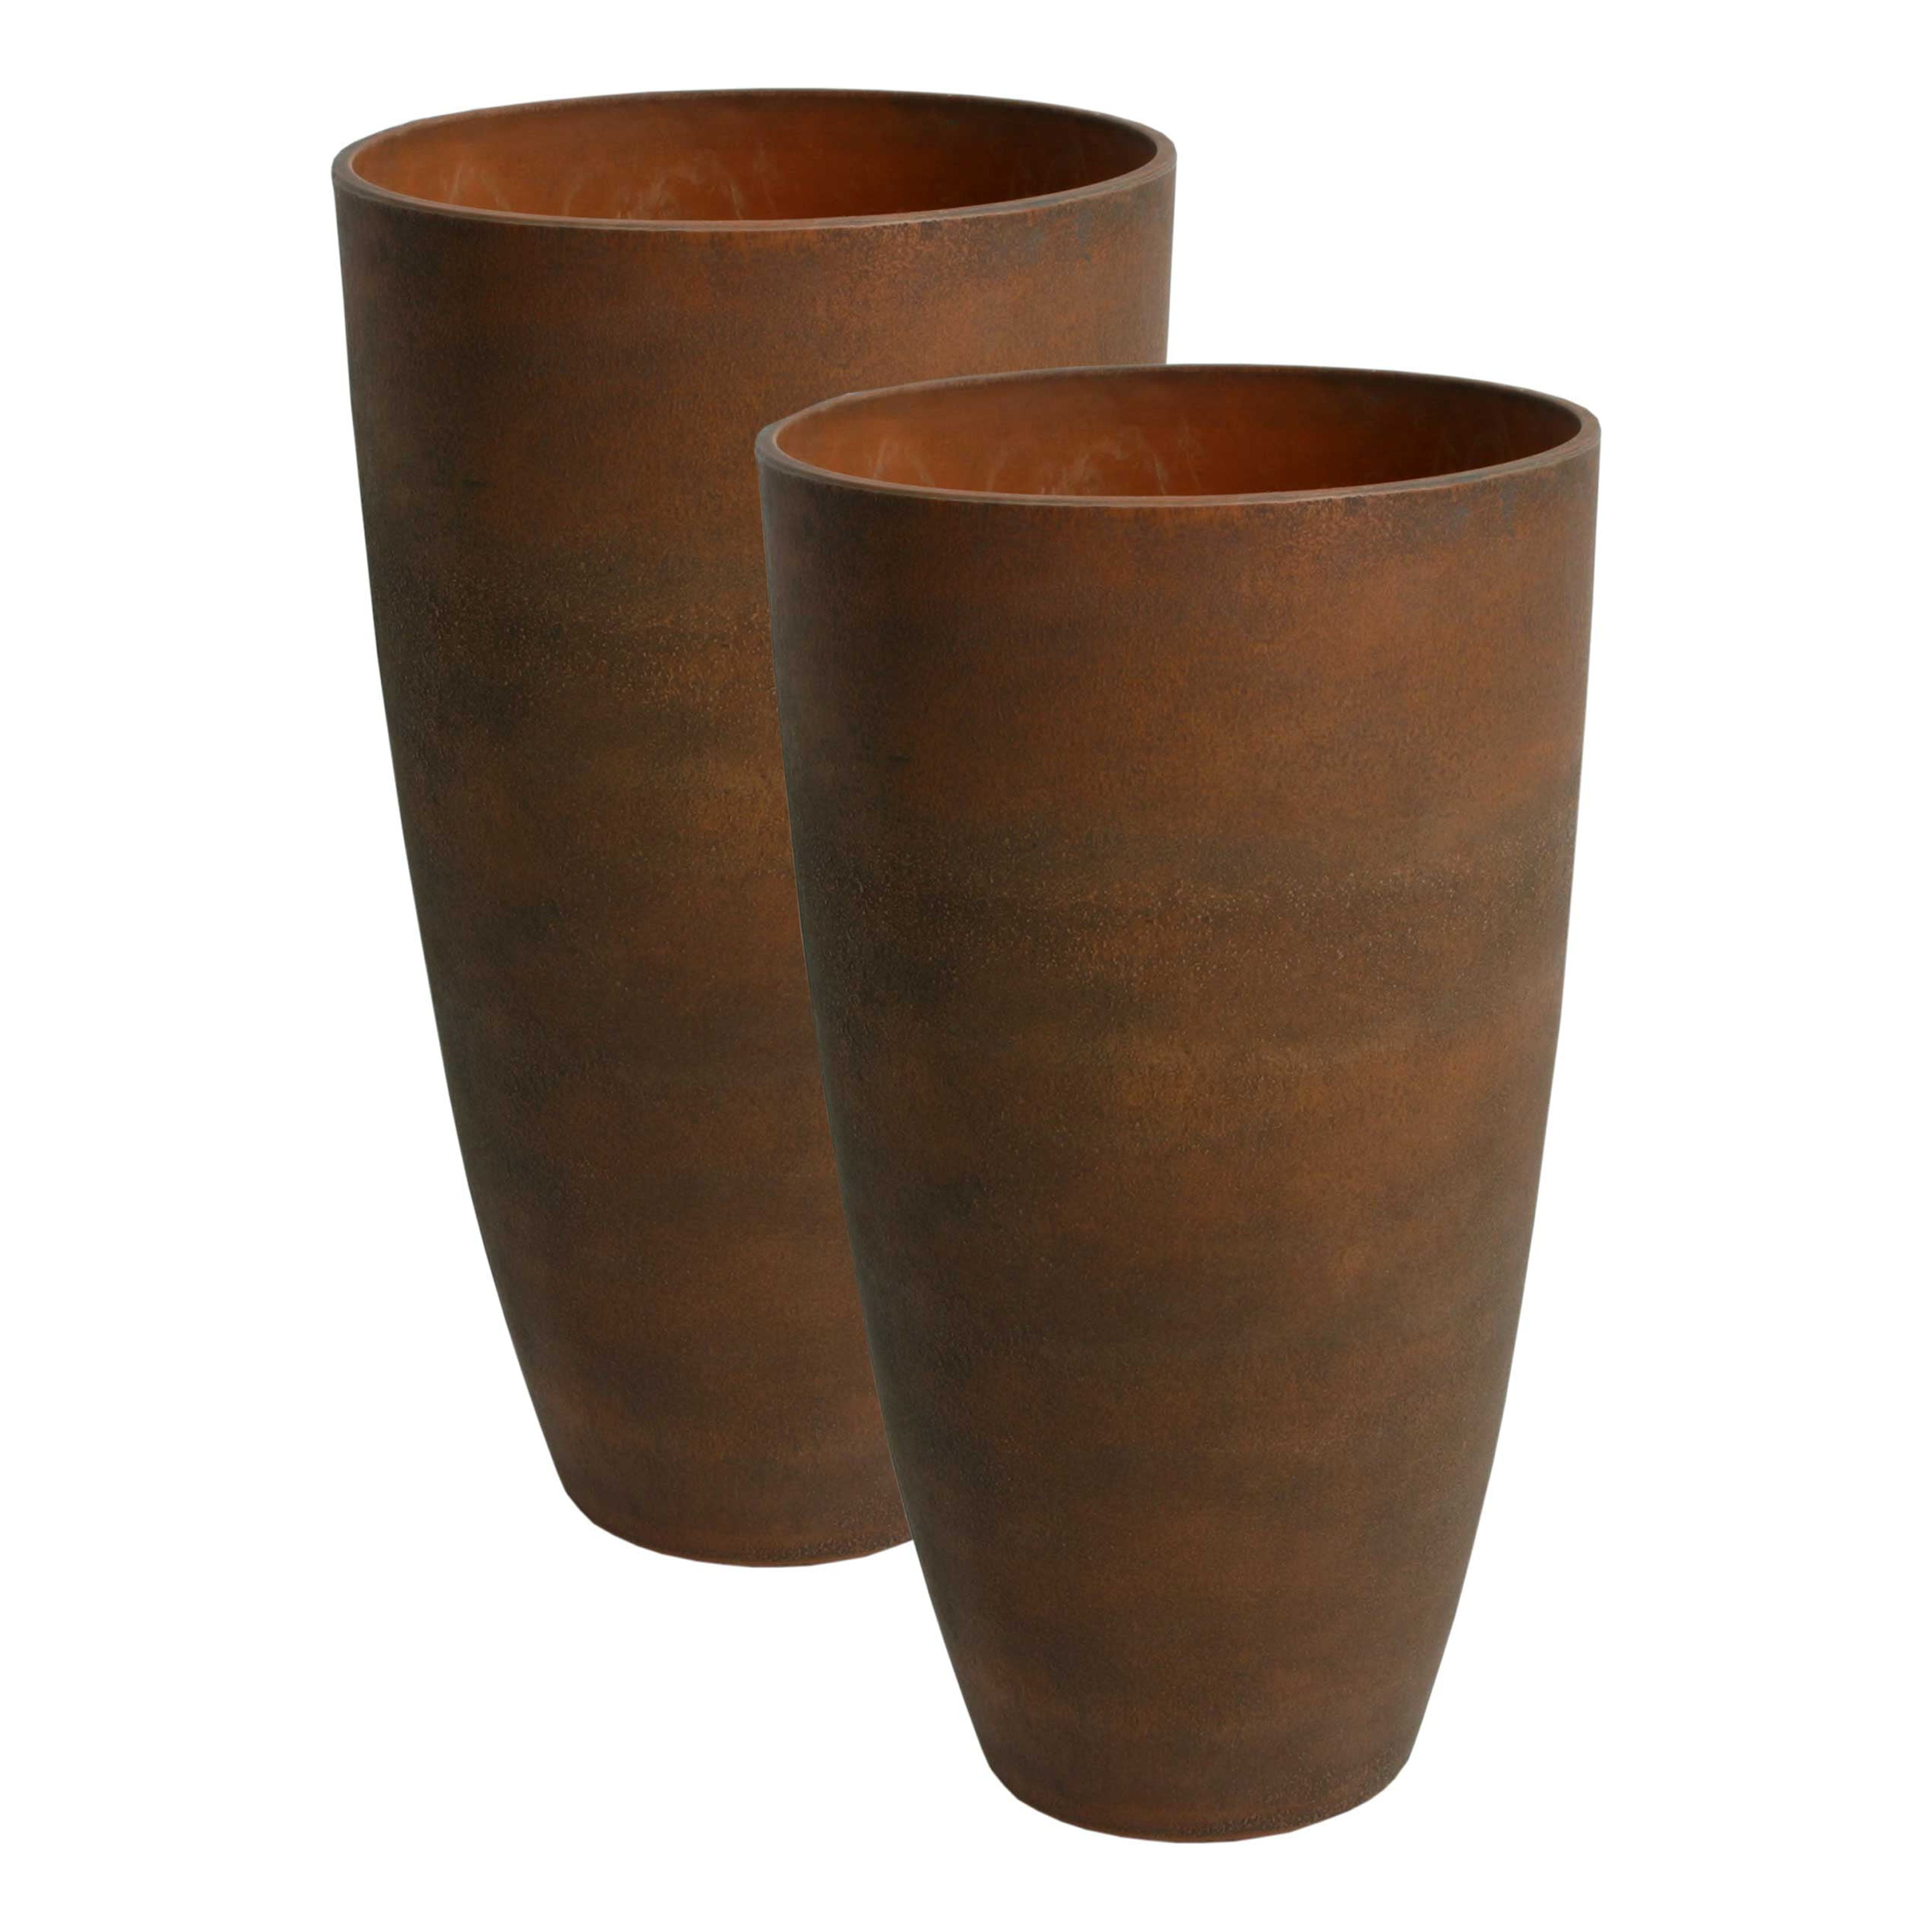 43428 Acerra 11.5 In. By 20 In. Height Curved Vase Planters, Rust - Pack Of 2